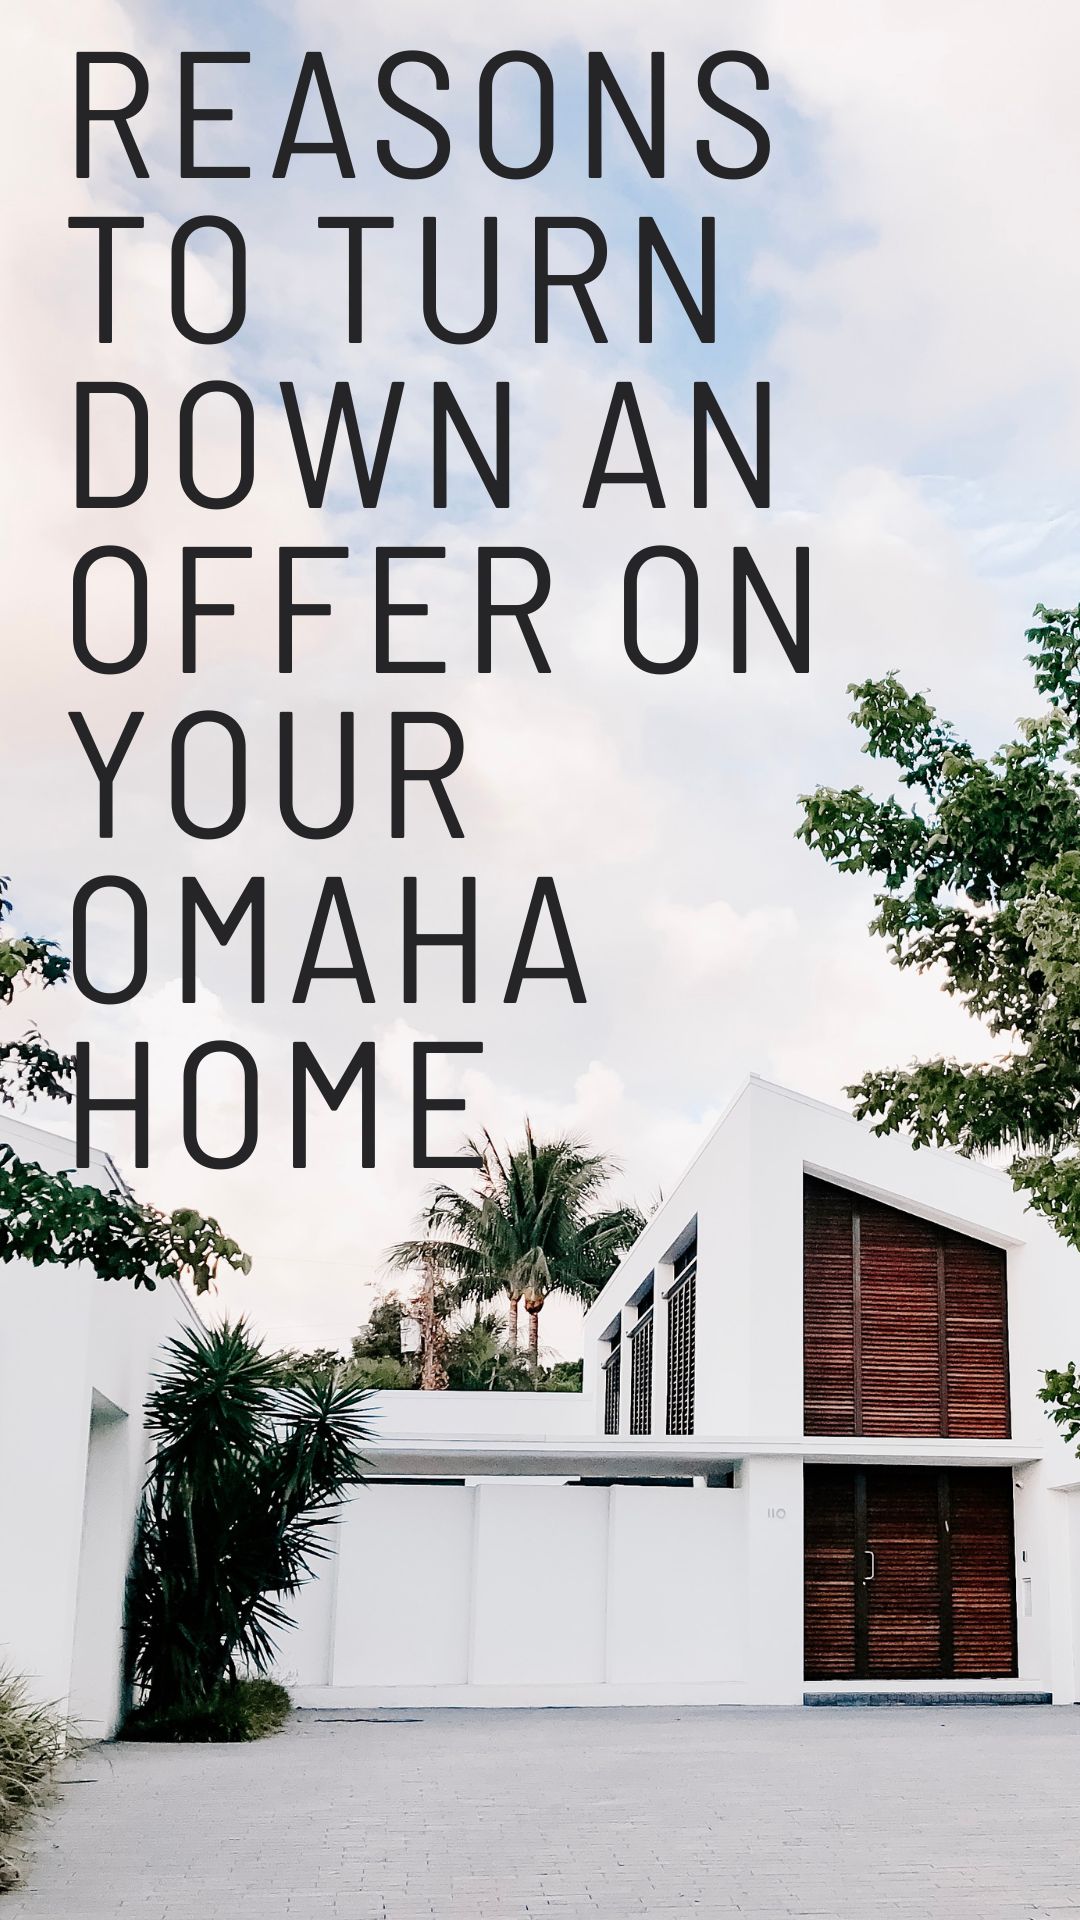 Reasons to Turn Down an Offer on Your Omaha Home